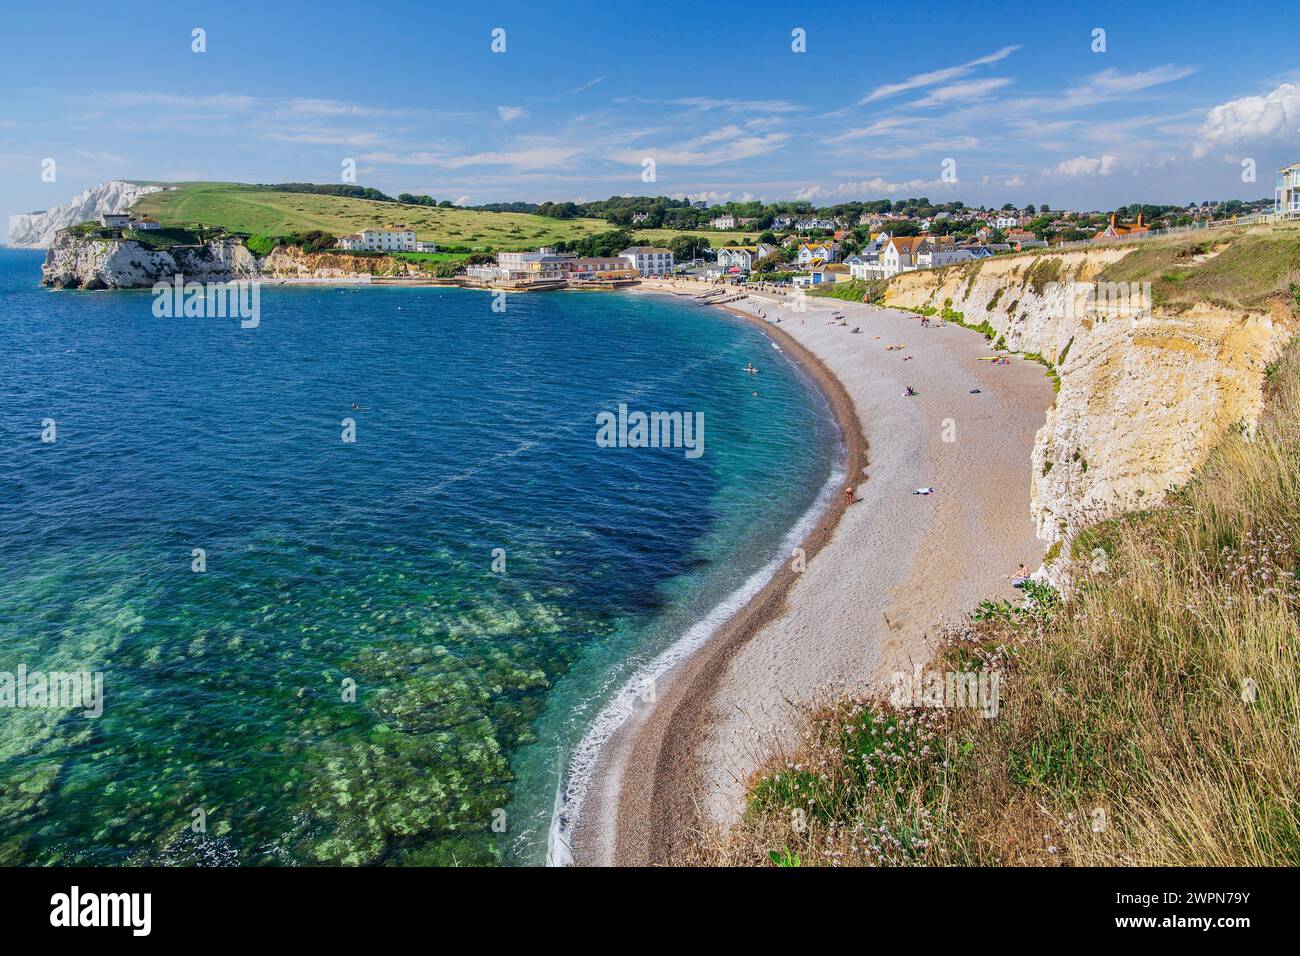 Beach with cliffs at Freshwater Bay, Freshwater, Isle of Wight, Hampshire, Great Britain, England Stock Photo